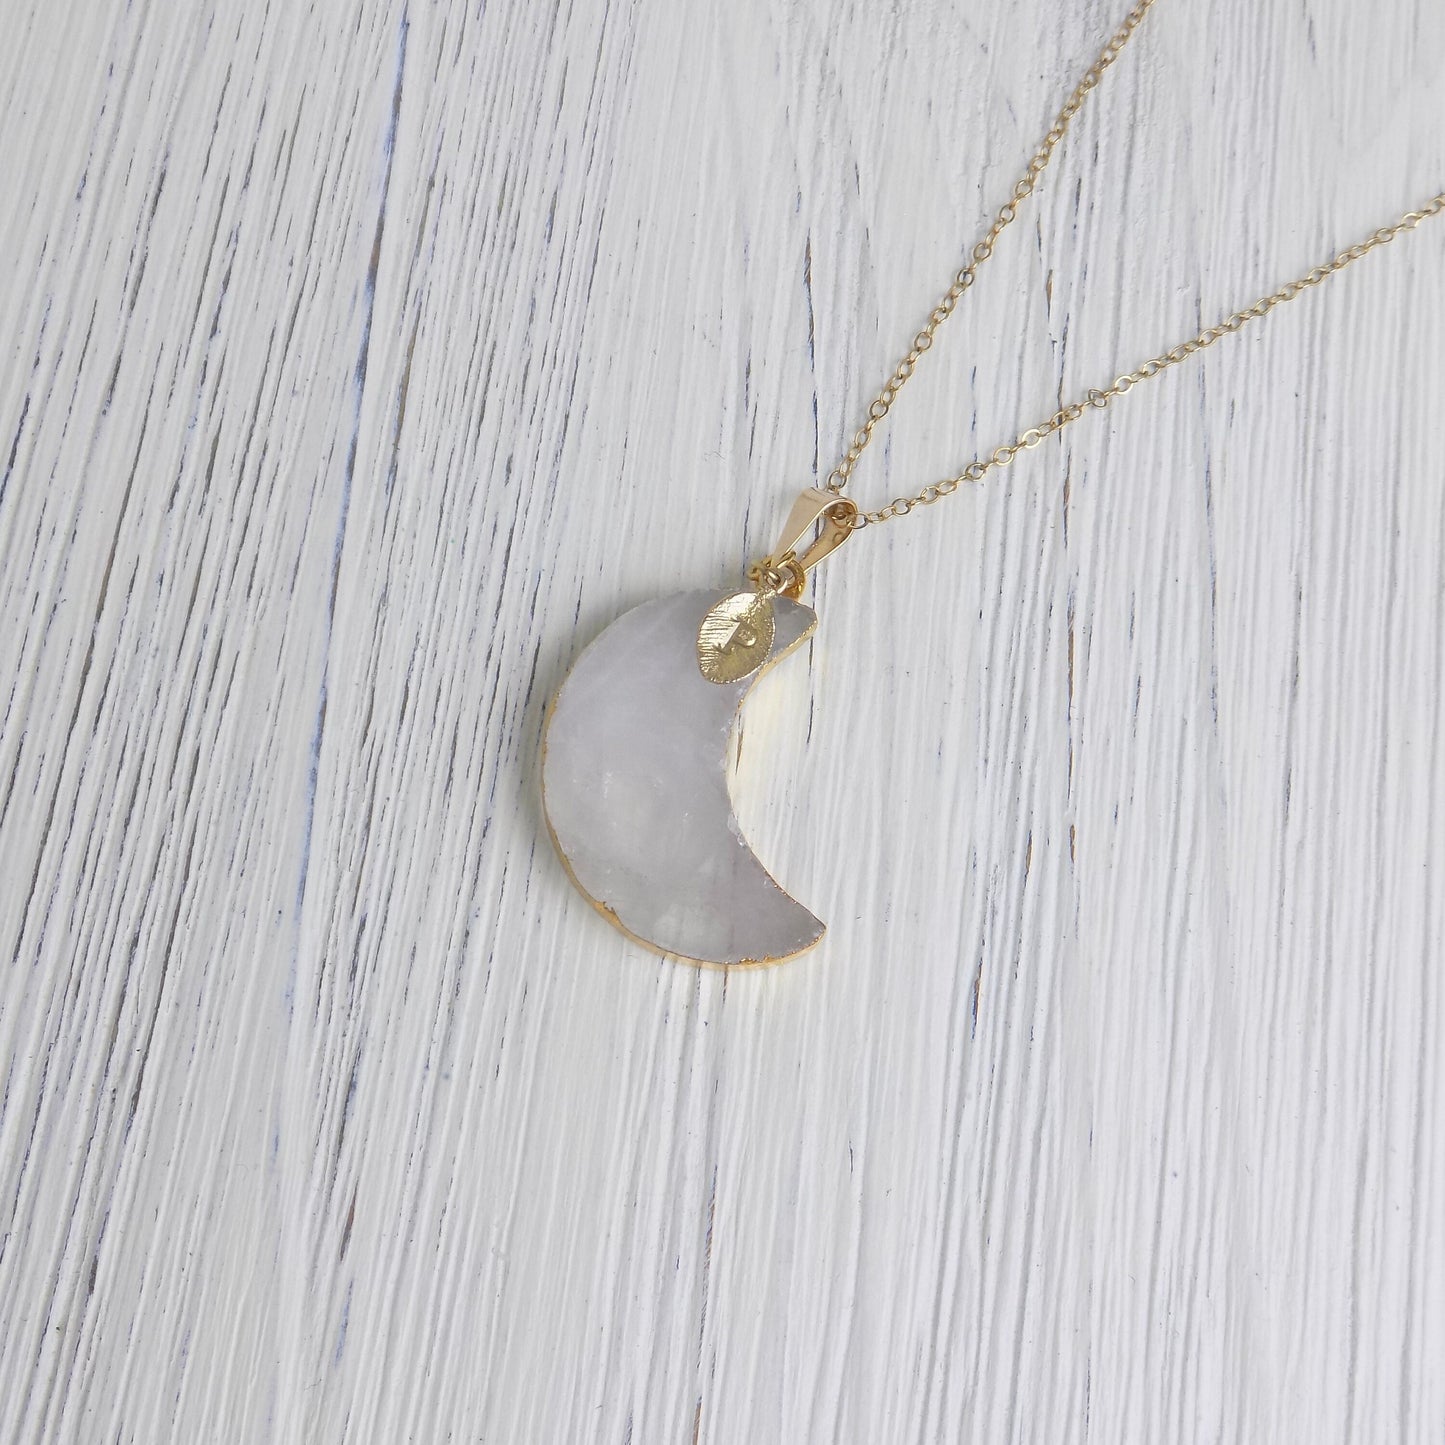 Boho Moon Necklace Gold, Crescent Moon Pendant, Personalized Custom Initial, Christmas Gift For Best Friend, R14-26